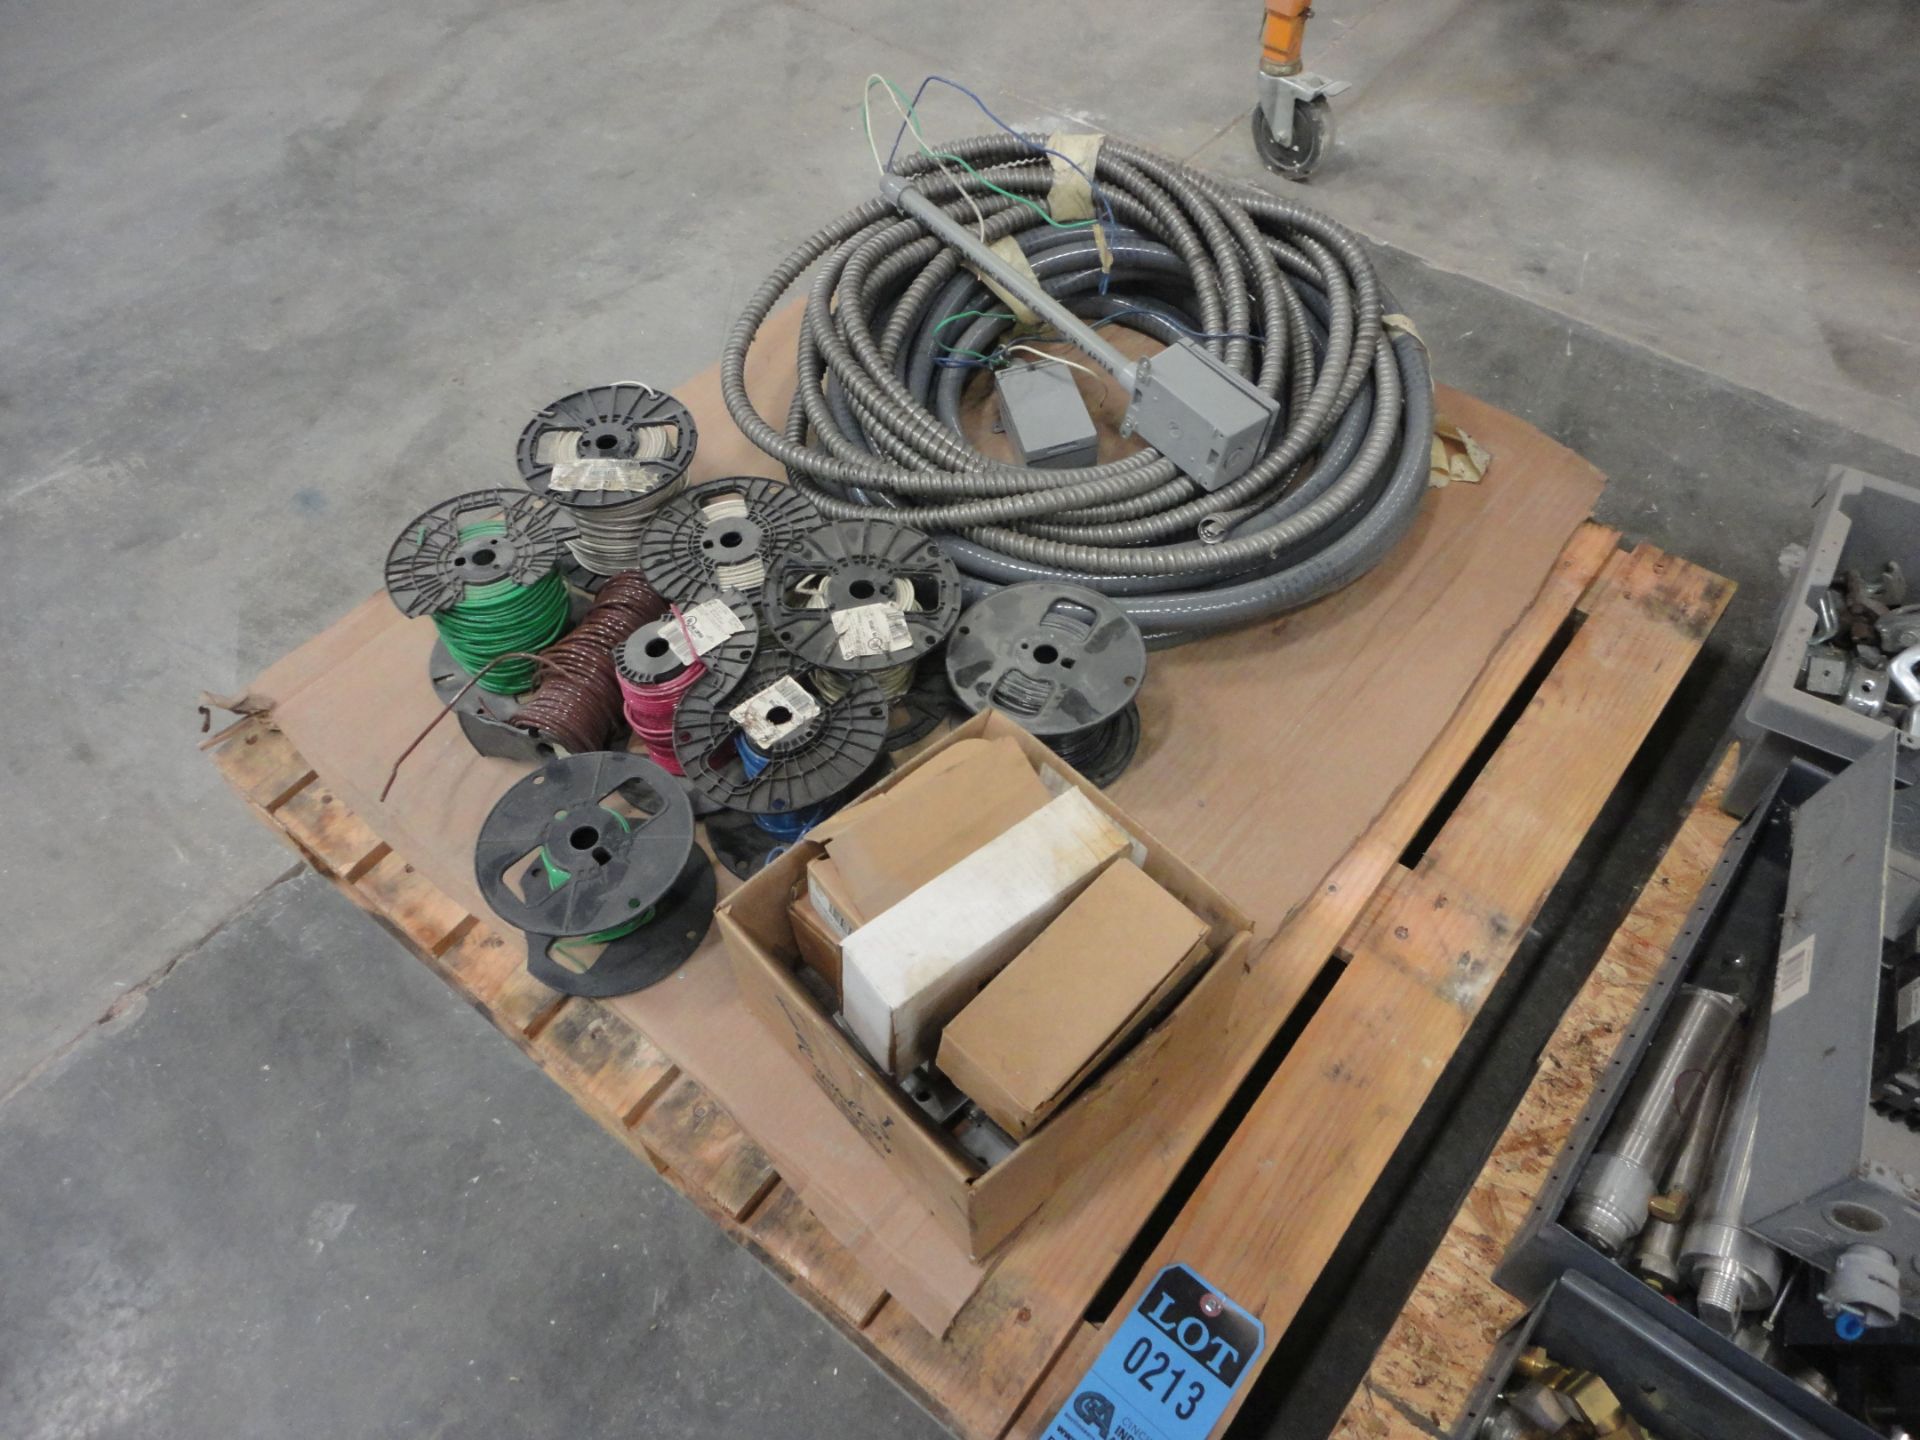 SKID MISCELLANEOUS ELECTRICAL HARDWARE - Image 2 of 2